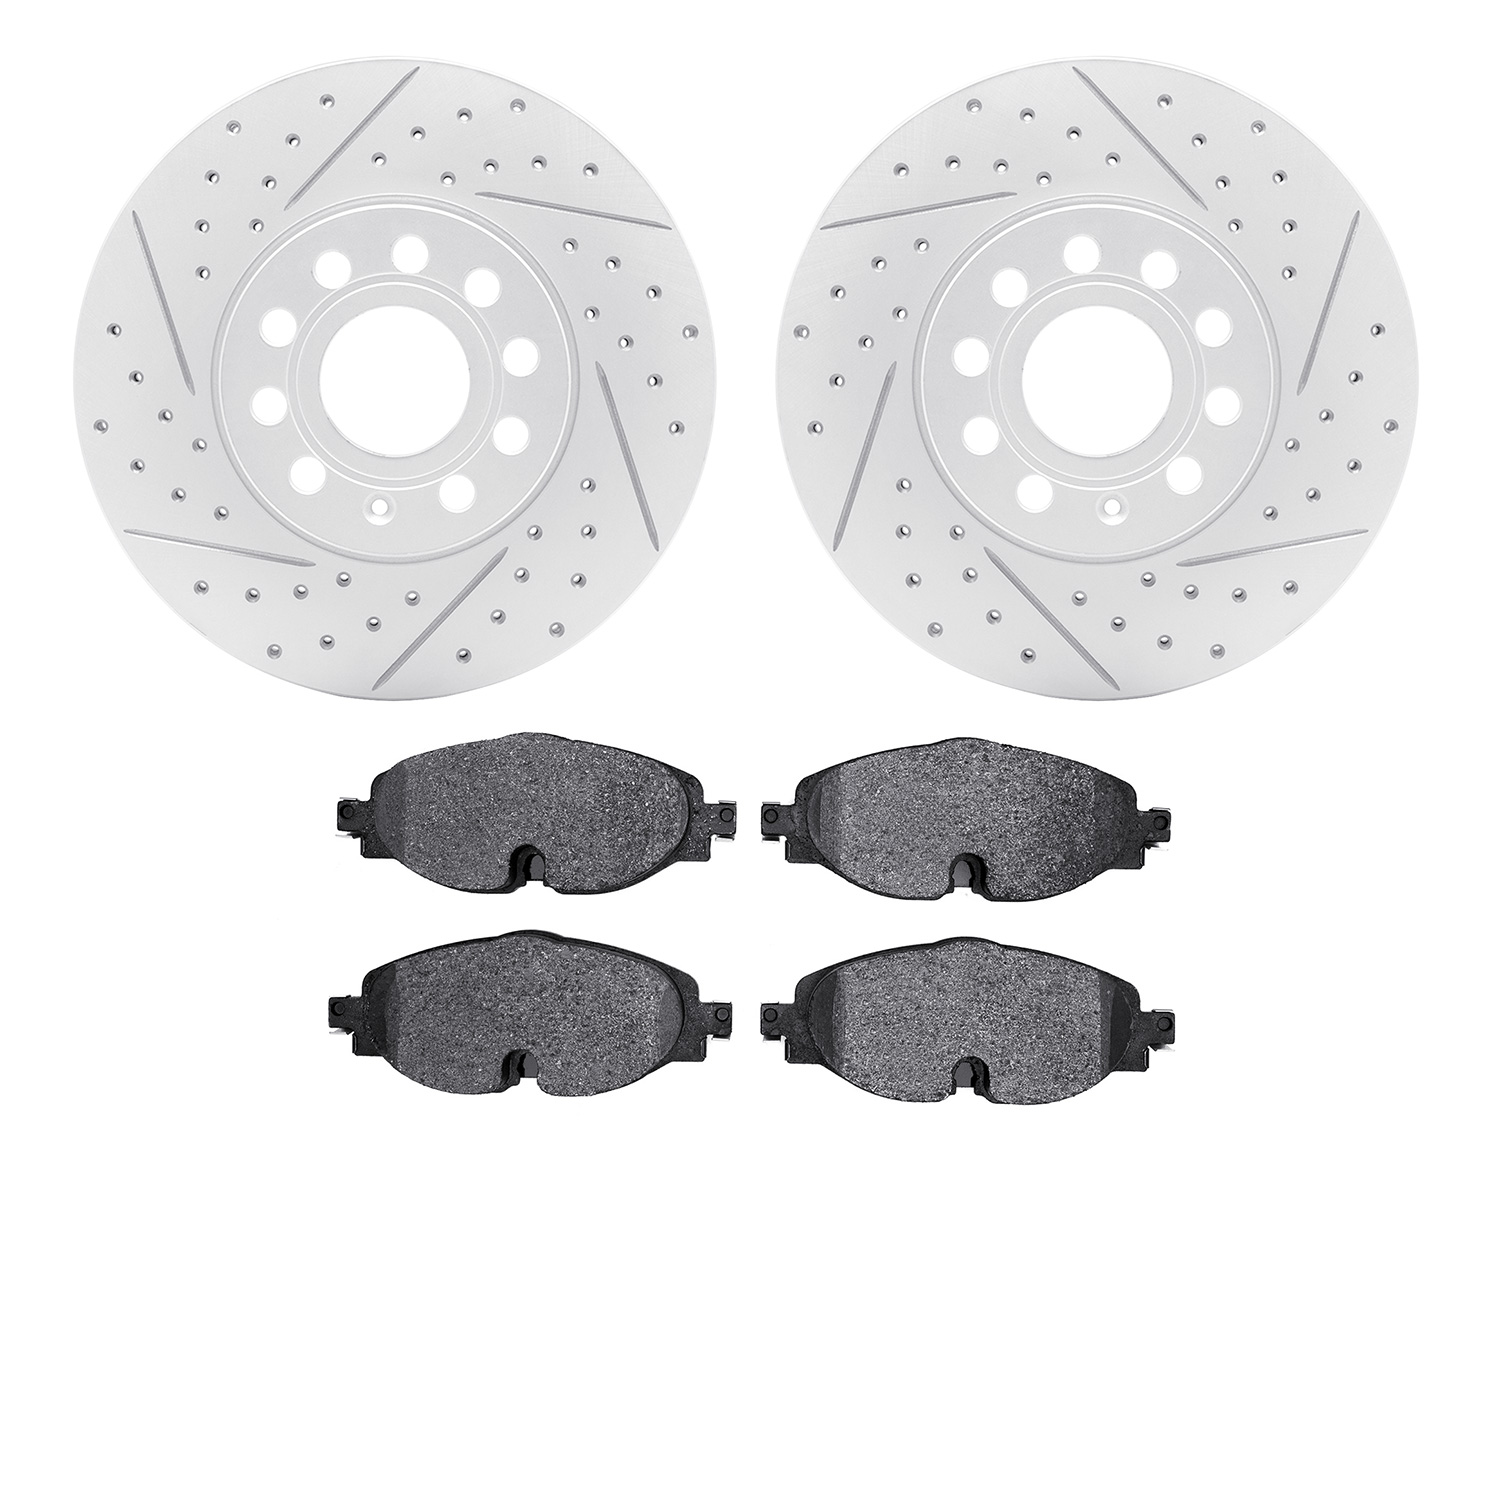 2502-74039 Geoperformance Drilled/Slotted Rotors w/5000 Advanced Brake Pads Kit, Fits Select Audi/Volkswagen, Position: Front